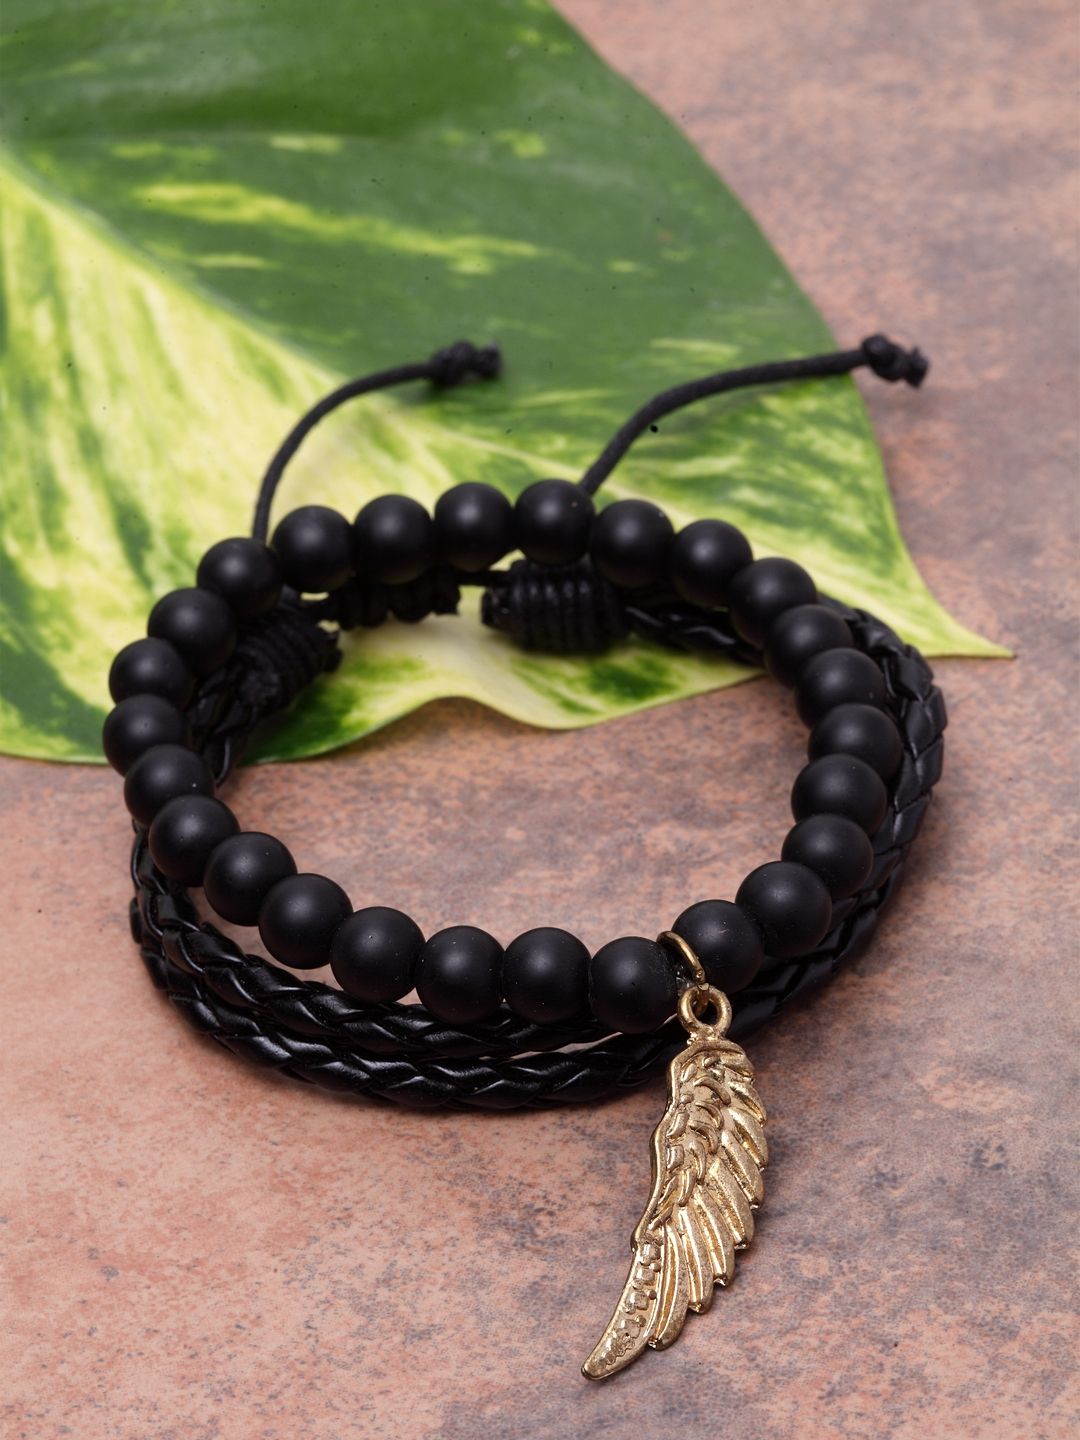 Black leather bracelet with silver clasp and golden accessories 